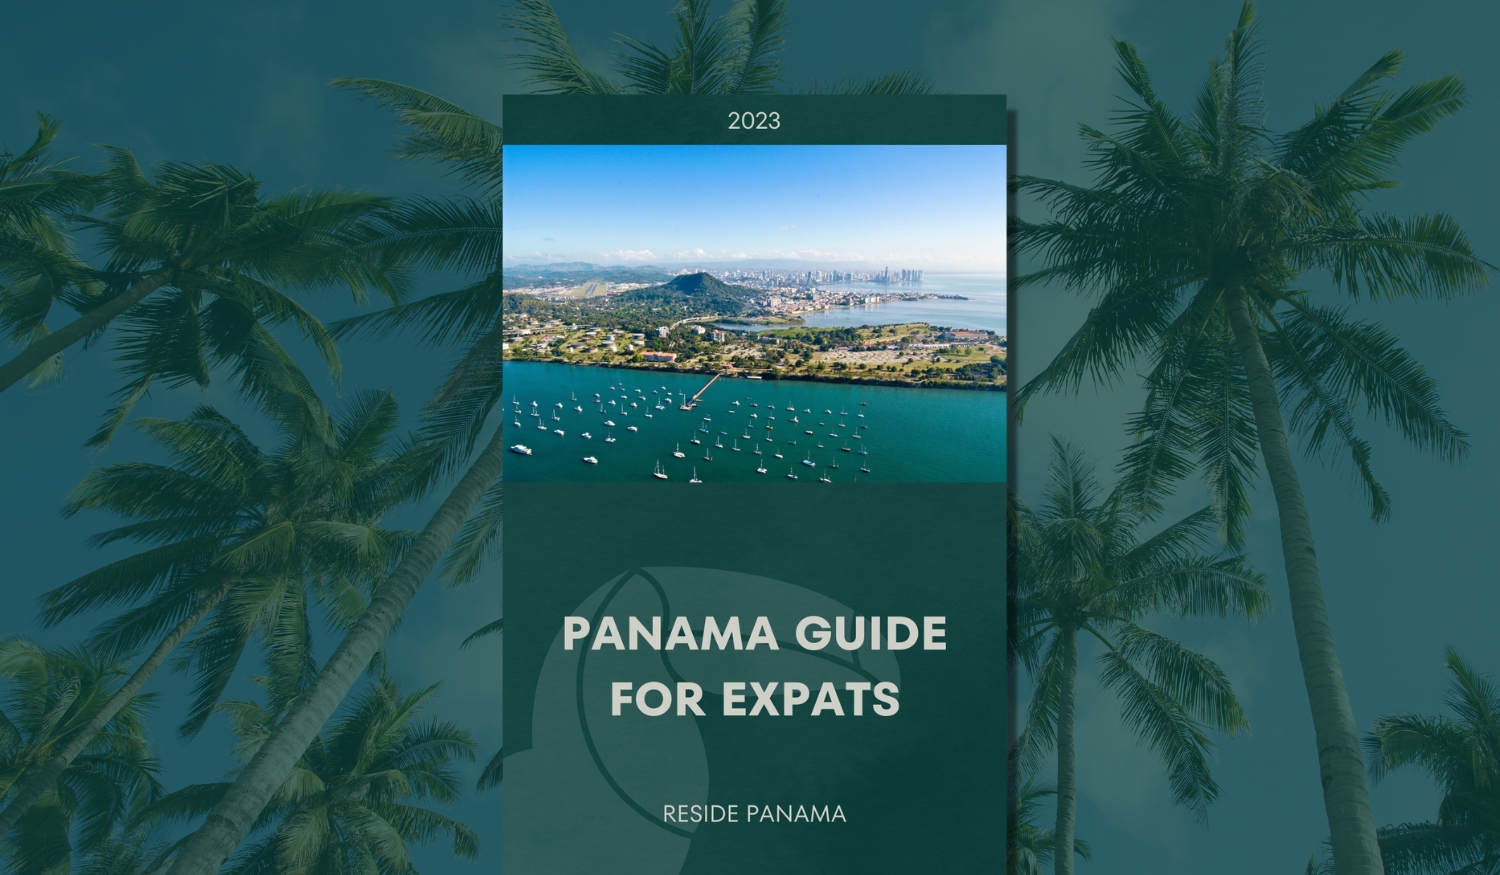 Panama Guide For Expats (1) #keepProtocol